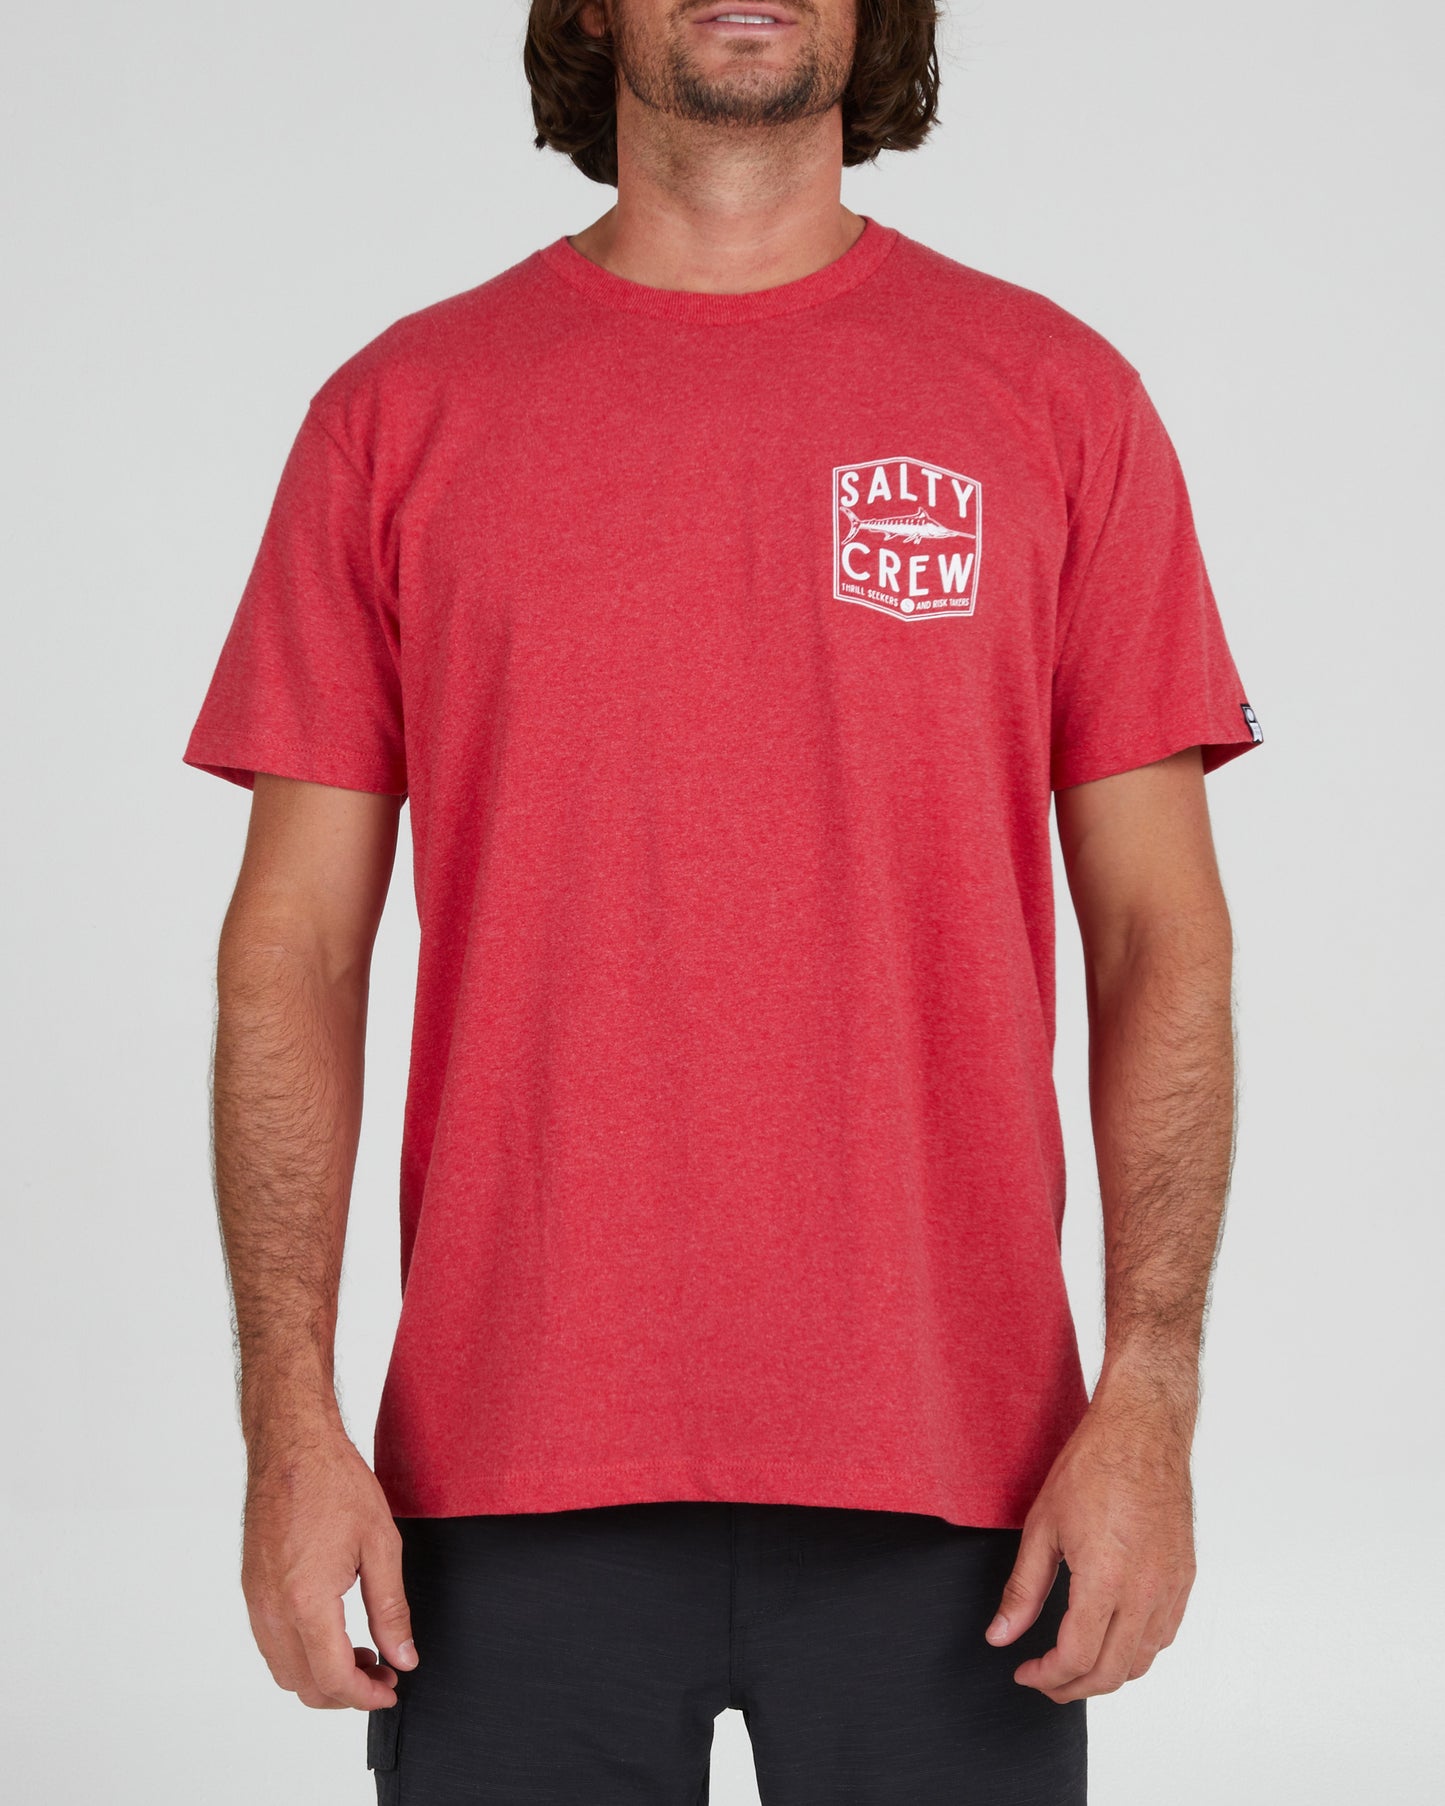 On body front of the Fishery Red Heather S/S Standard Tee